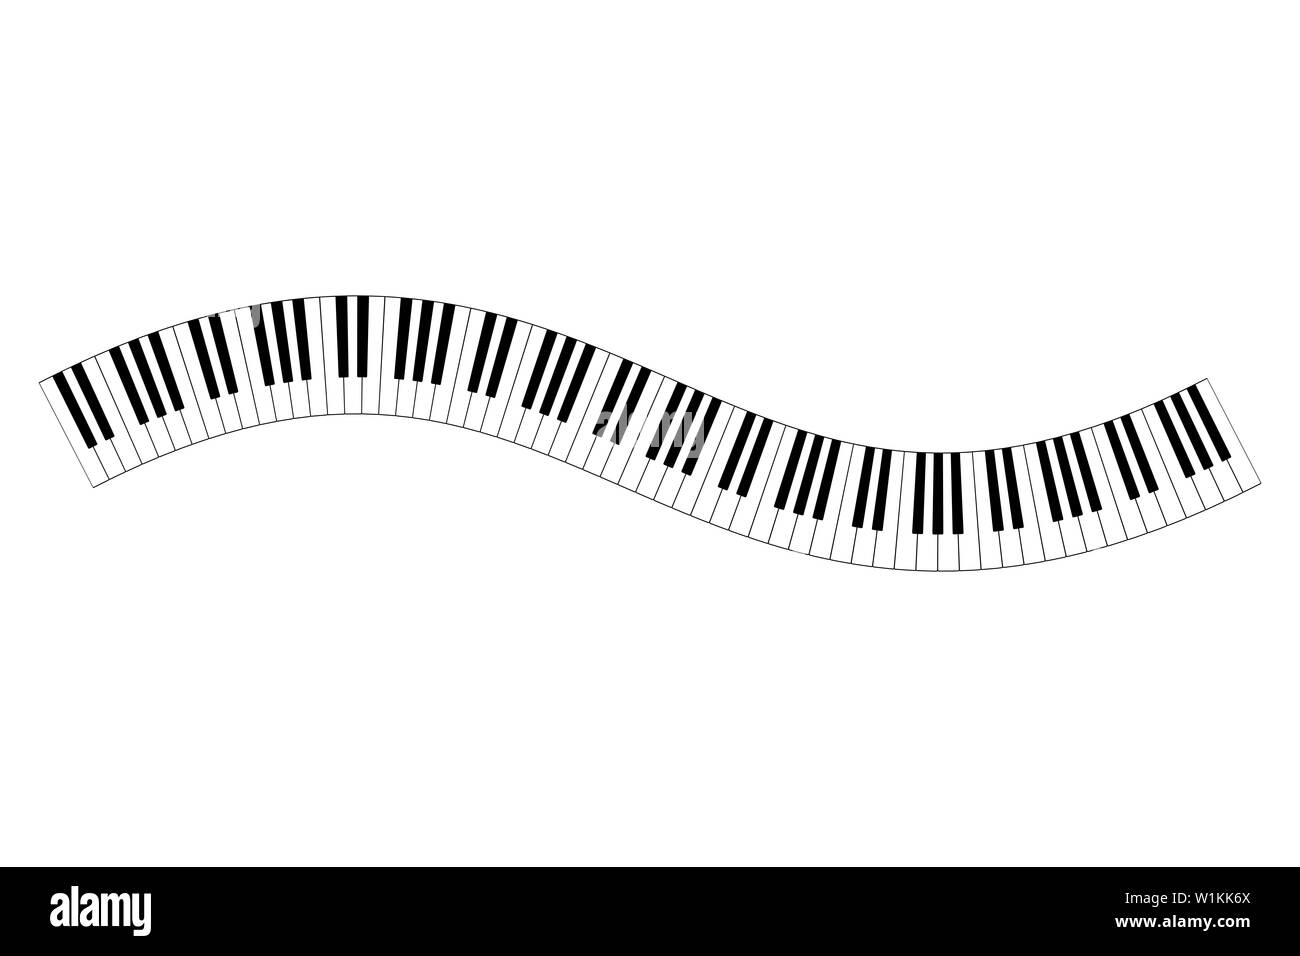 Musical keyboard wave, constructed from octave patterns, black and white  piano keyboard keys, shaped into repeated motif. Illustration Stock Photo -  Alamy